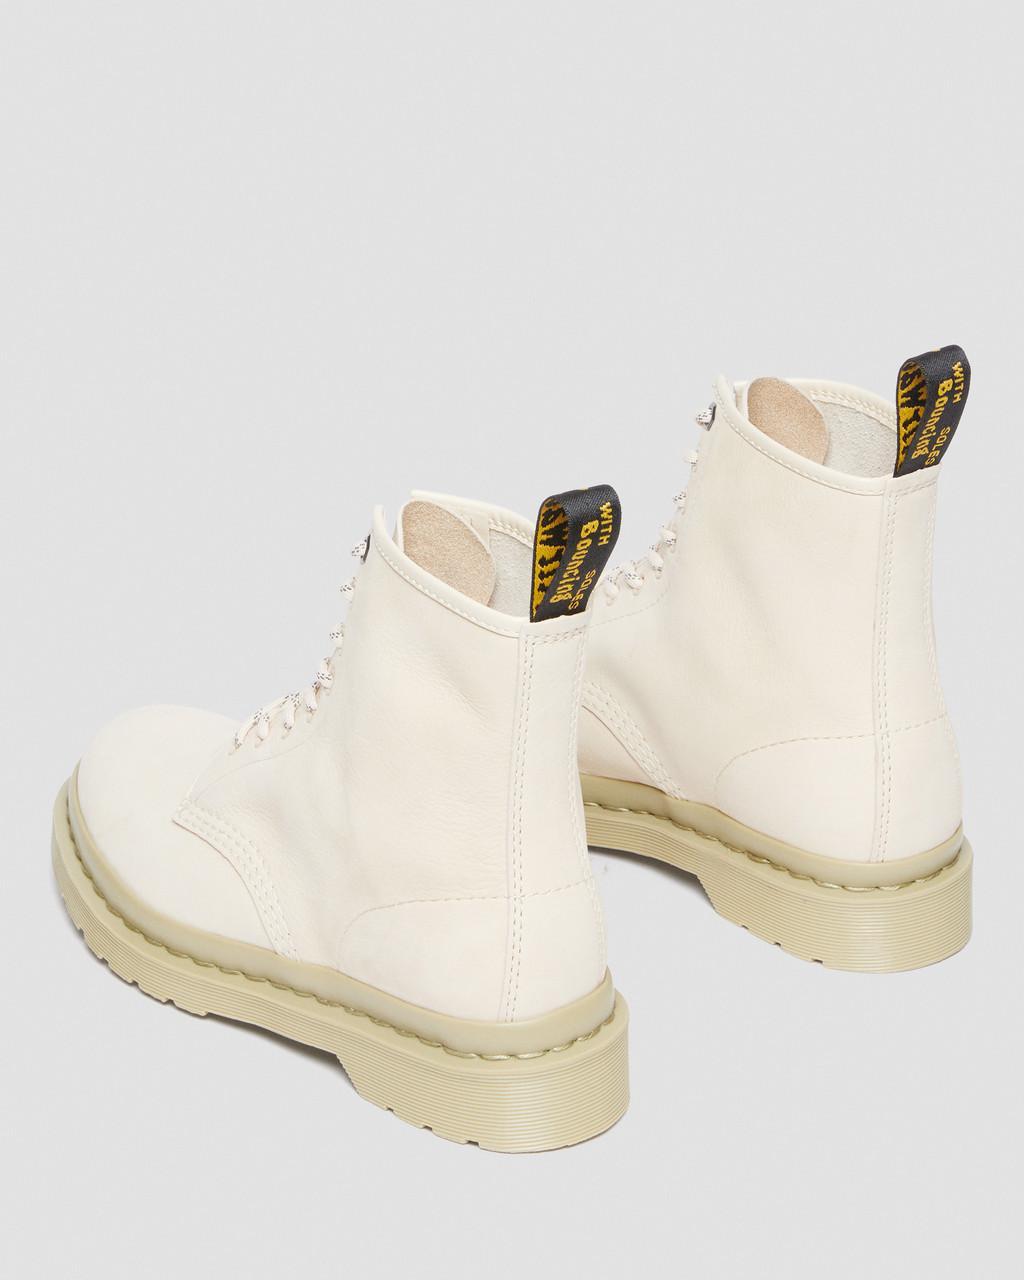 Dr. Martens 1460 Mono Milled Nubuck Leather Lace Up Boots in Natural | Lyst